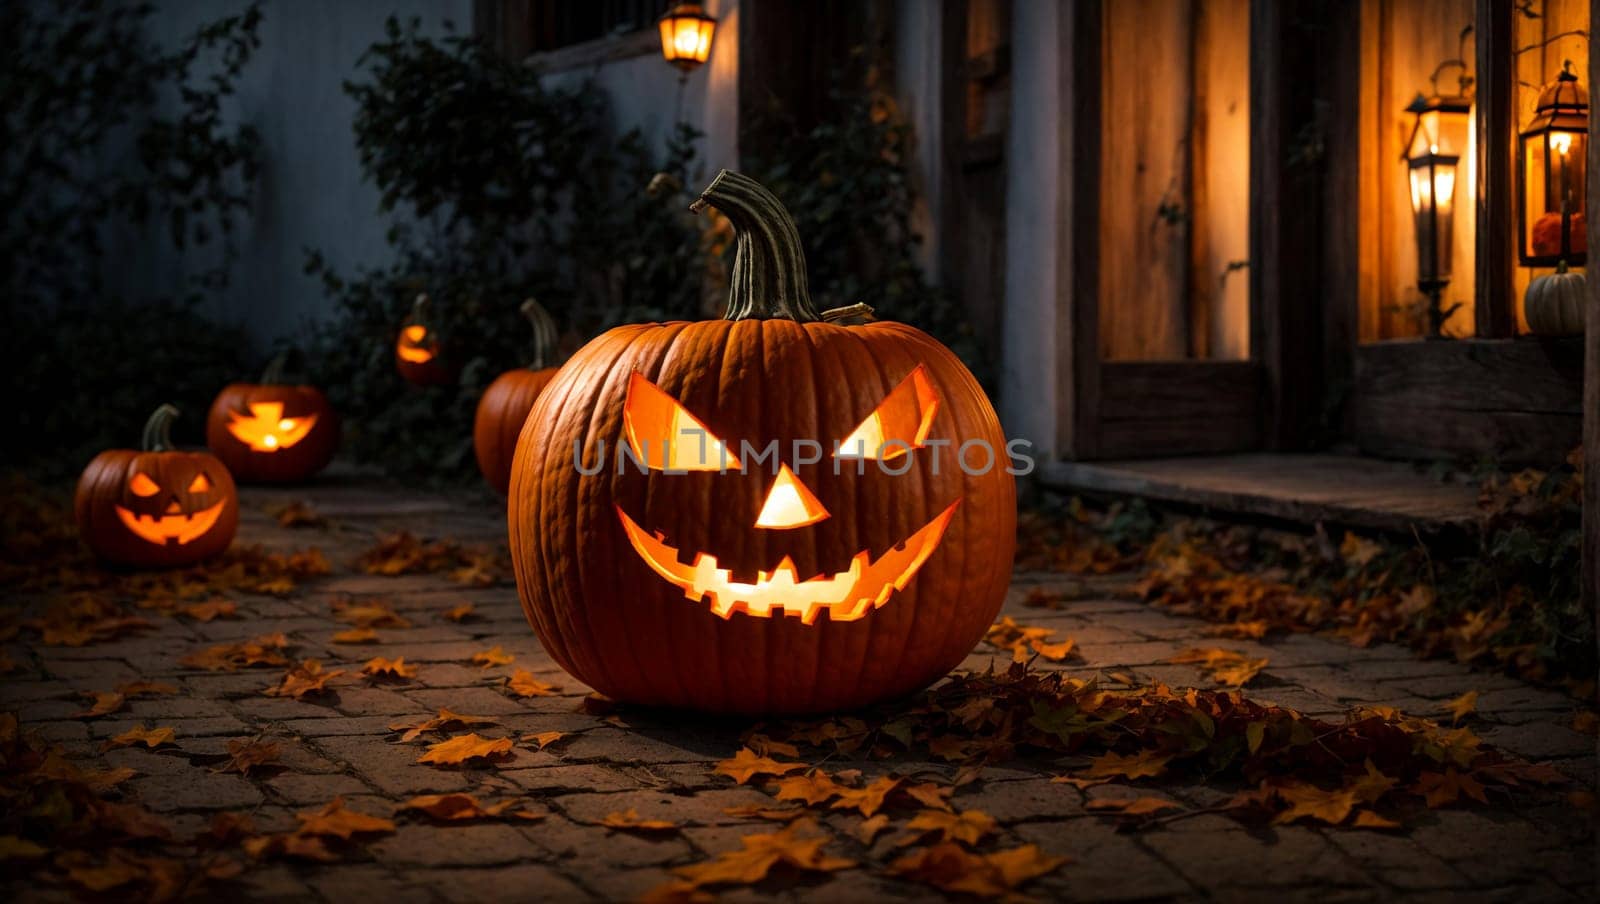 A pumpkin carved in the shape of a lantern, with a terrifying and sinister face by Севостьянов